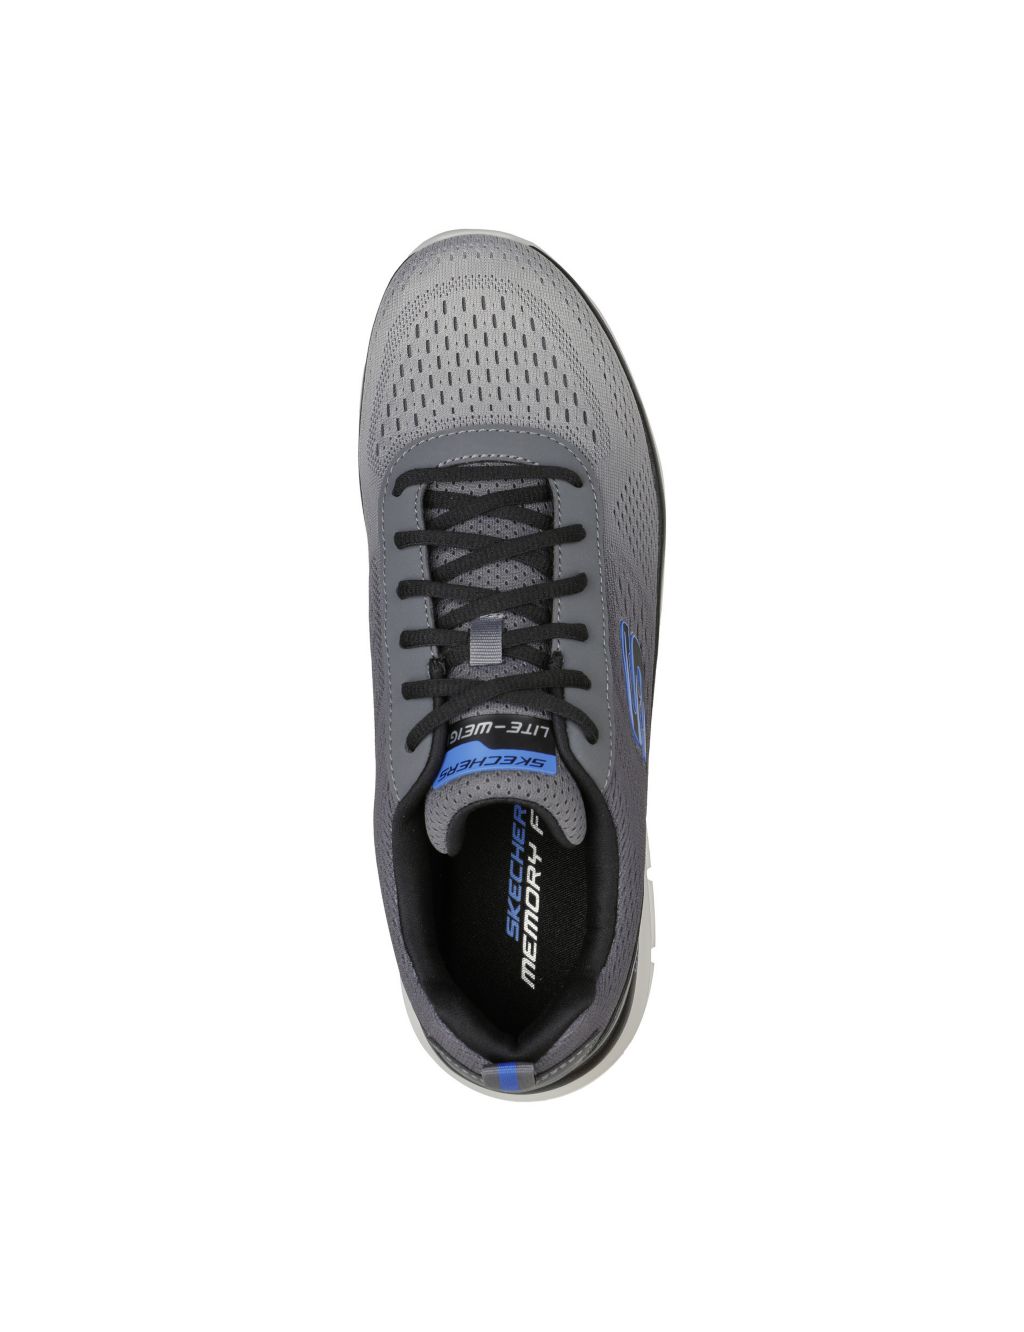 Track Ripkent Lace Up Trainers image 3